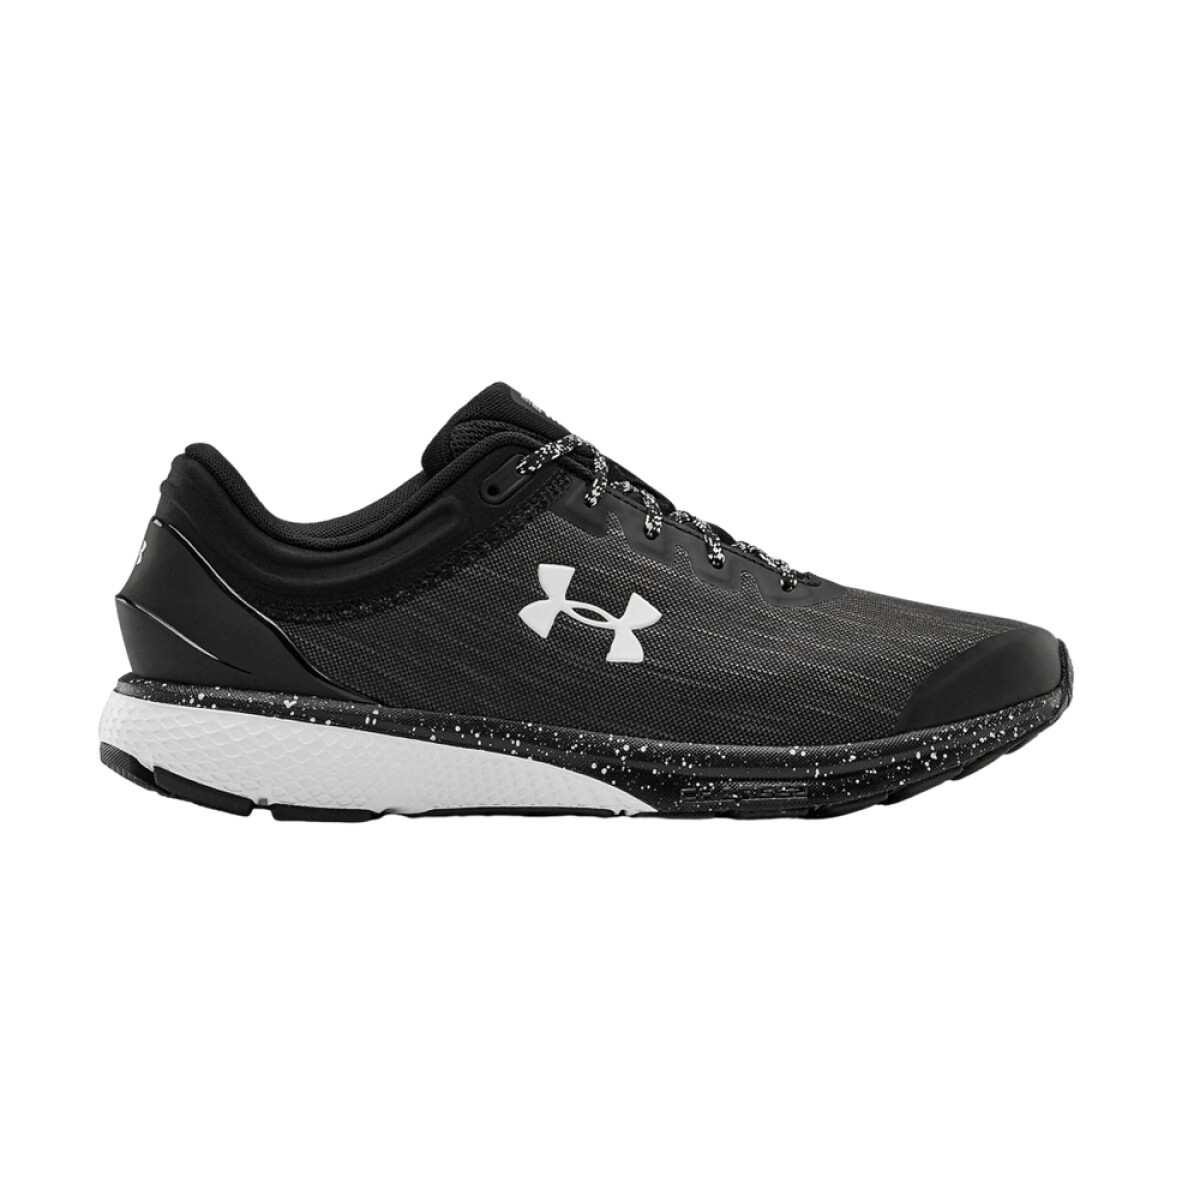 UNDER ARMOUR CHARGED ESCAPE 3 EVO - Black 